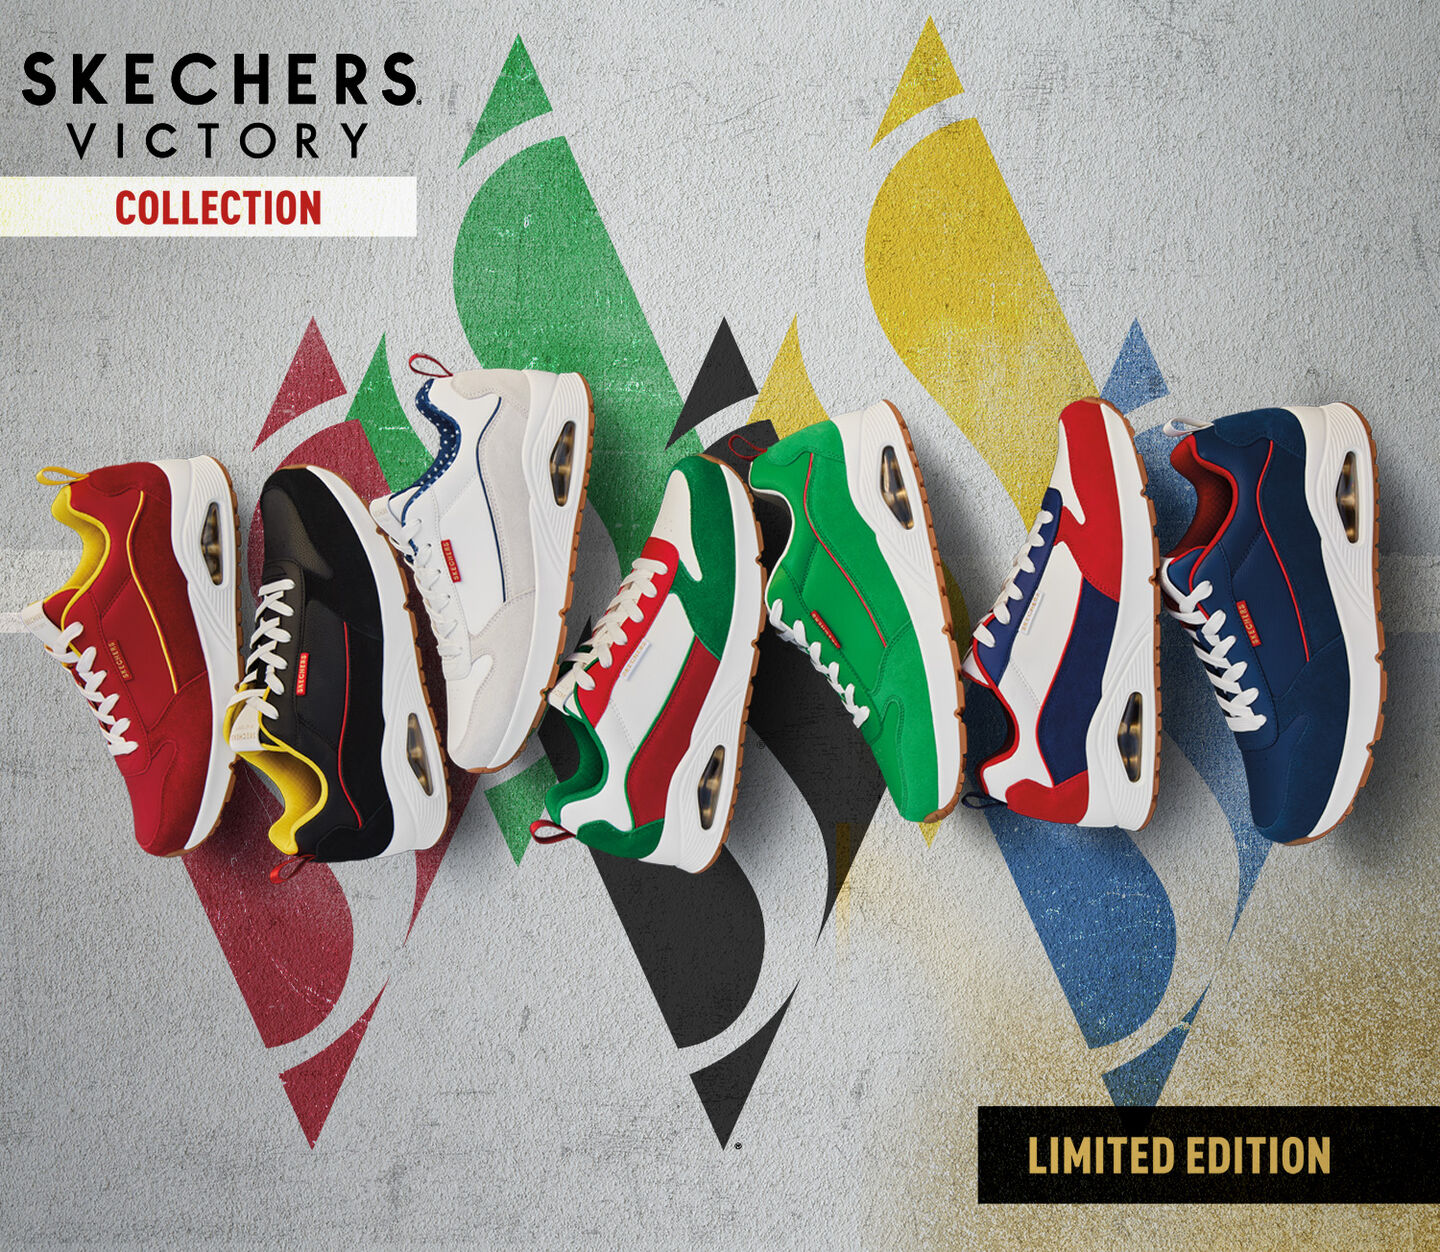 Skechers Victory Collection